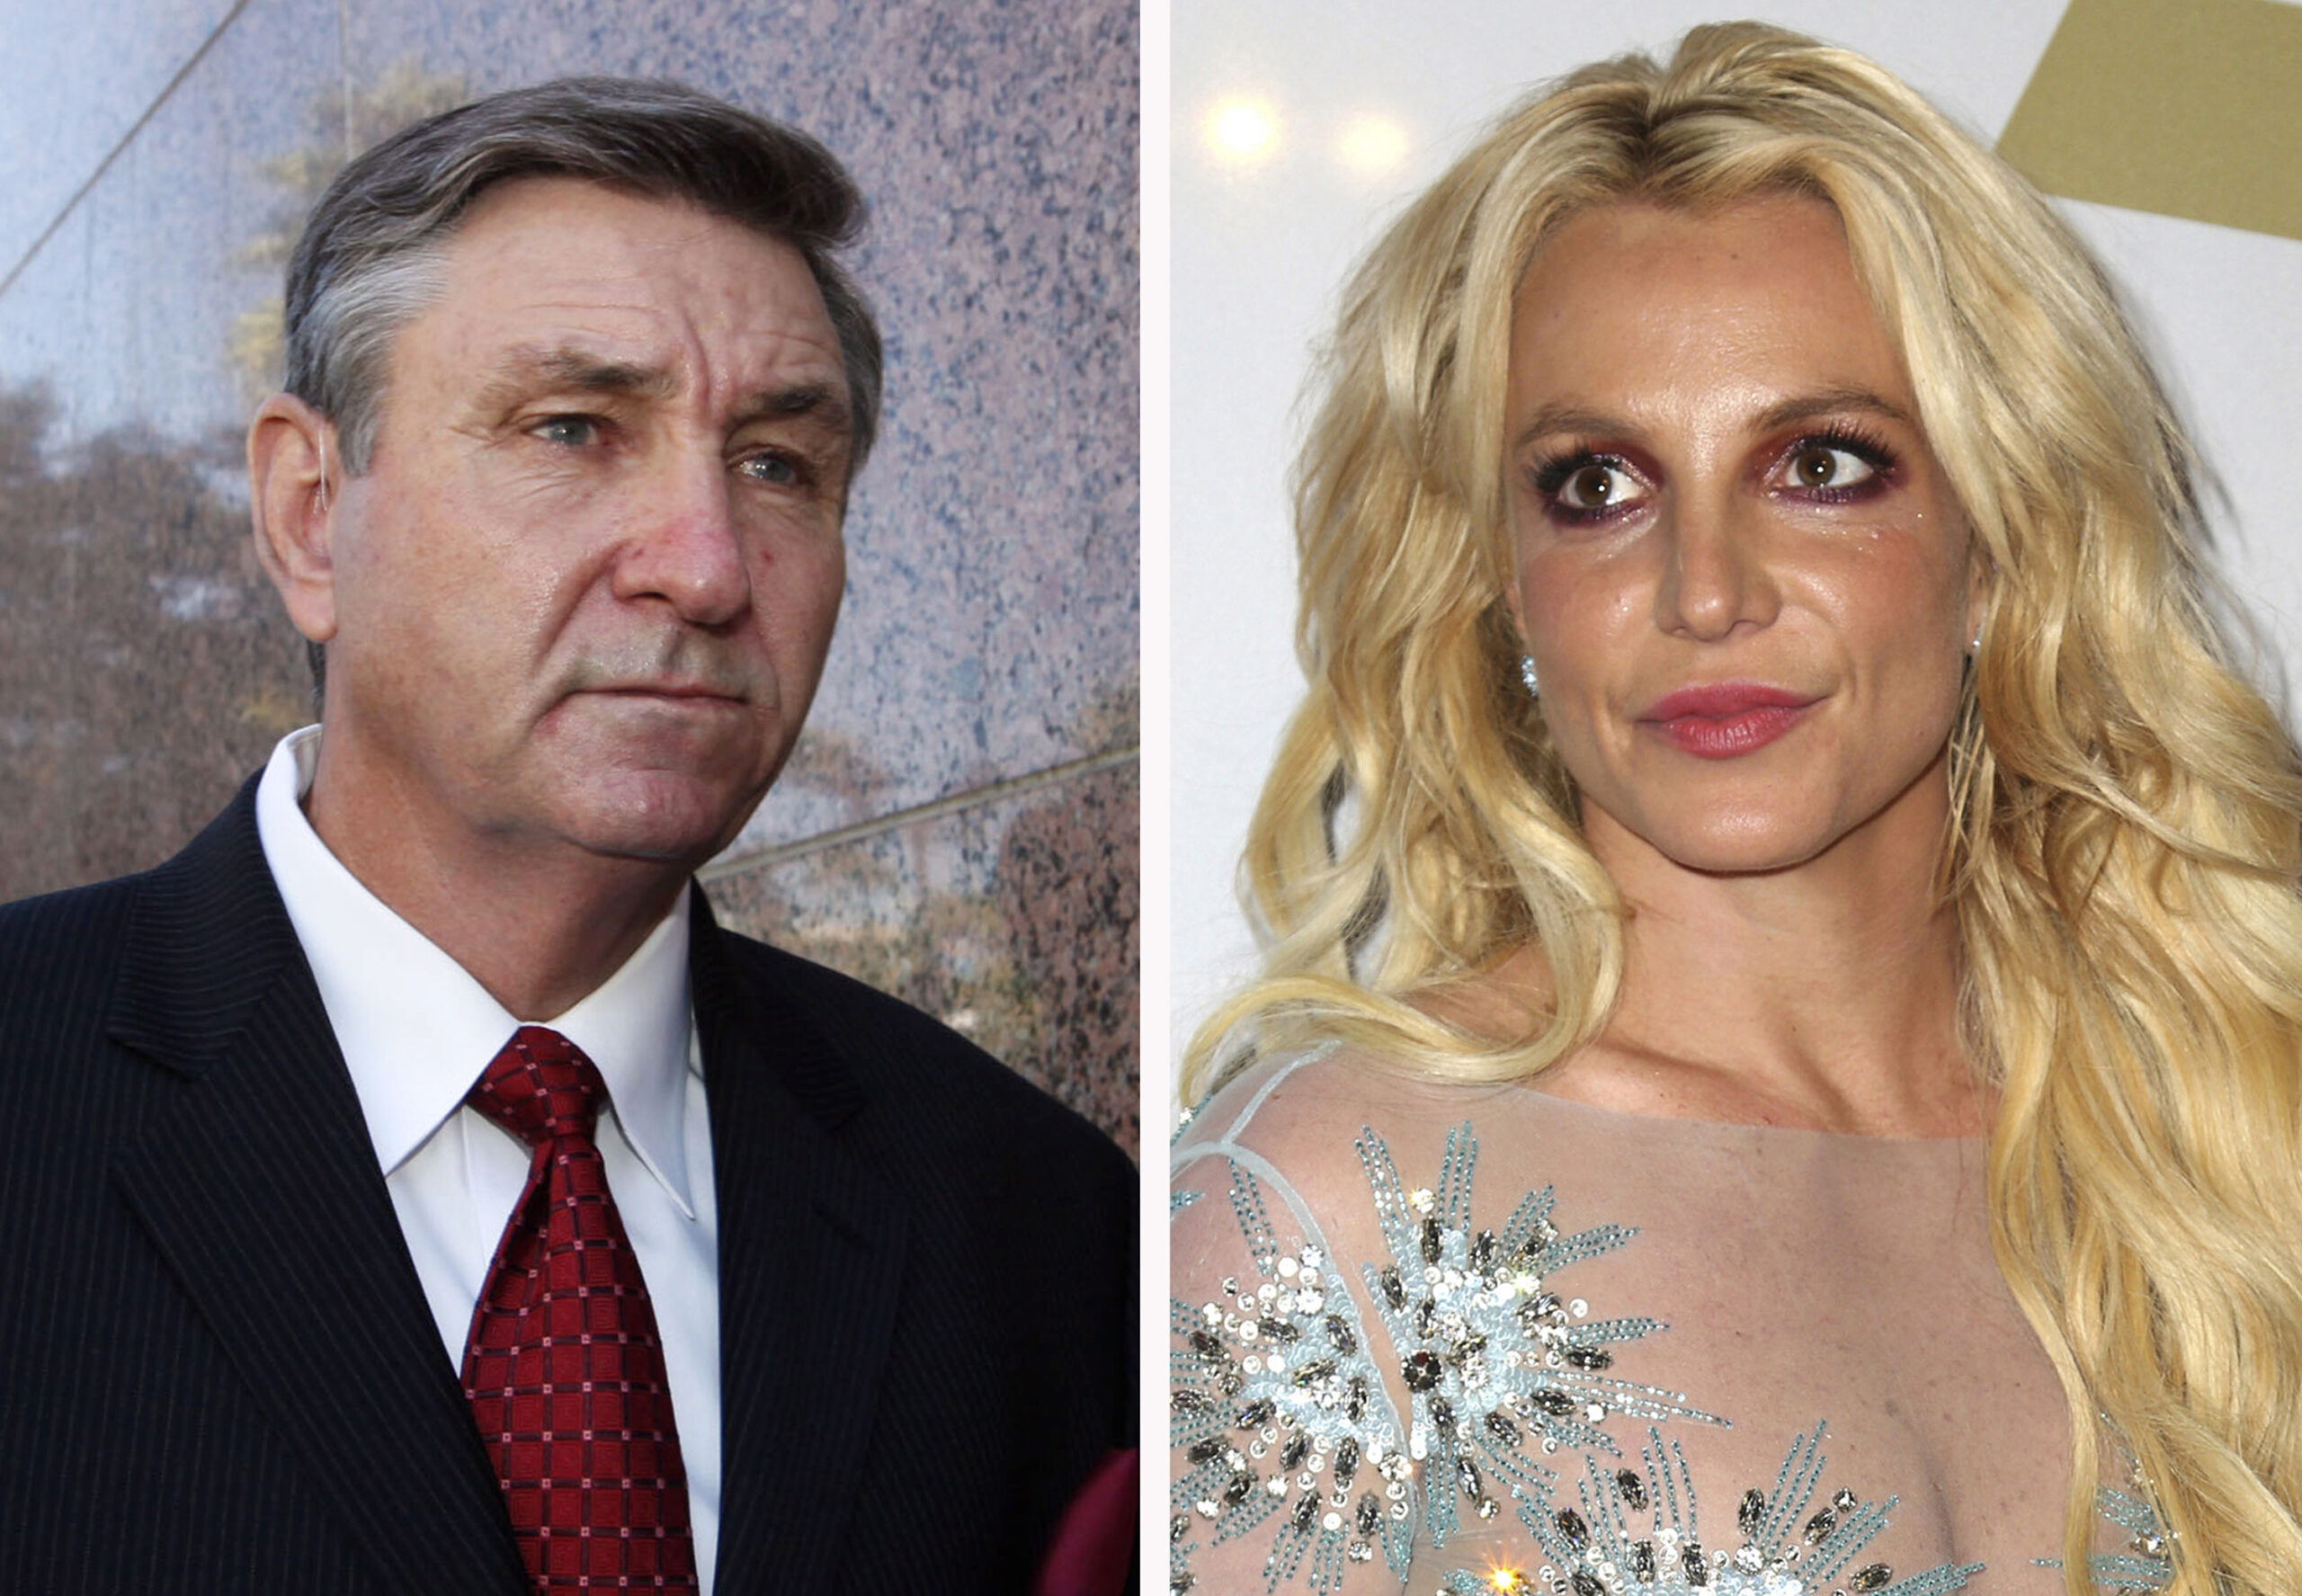 FILE - This combination photo shows Jamie Spears, left, father of Britney Spears, as he leaves the Stanley Mosk Courthouse on Oct. 24, 2012, in Los Angeles and Britney Spears at the Clive Davis and The Recording Academy Pre-Grammy Gala on Feb. 11, 2017, in Beverly Hills, Calif. Britney Spears' father has filed to end the court conservatorship that has controlled the singer's life and money for 13 years. James Spears filed his petition to end the conservatorship in Los Angeles Superior Court on Tuesday, Sept. 7, 2021. (AP Photo/File)